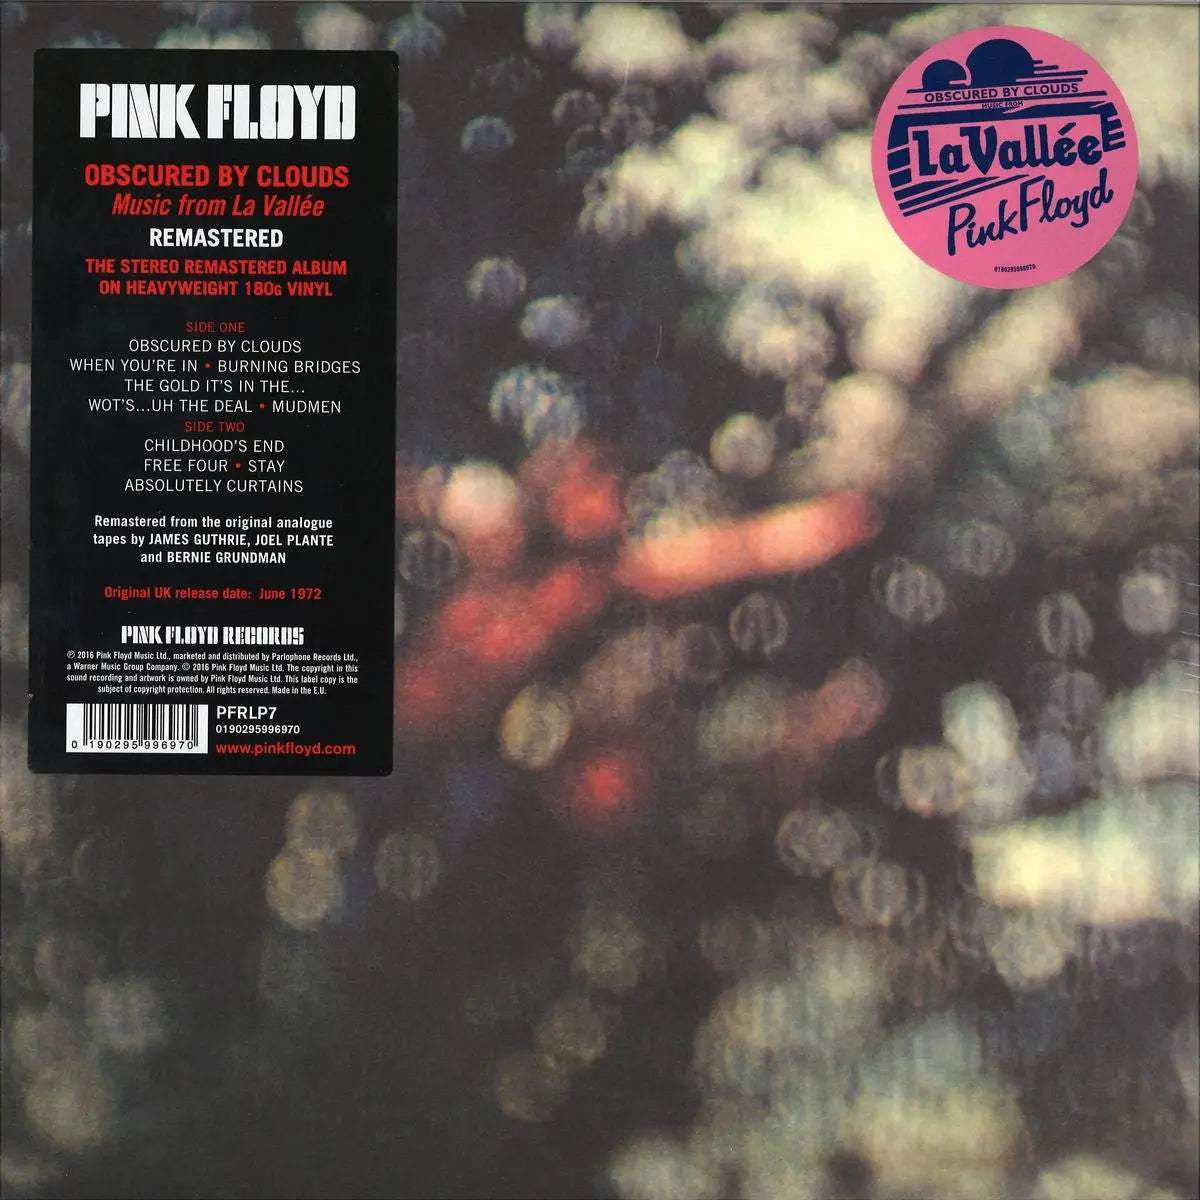 Pink Floyd - Obscured By Clouds (2011 Remastered) [Vinyl LP]